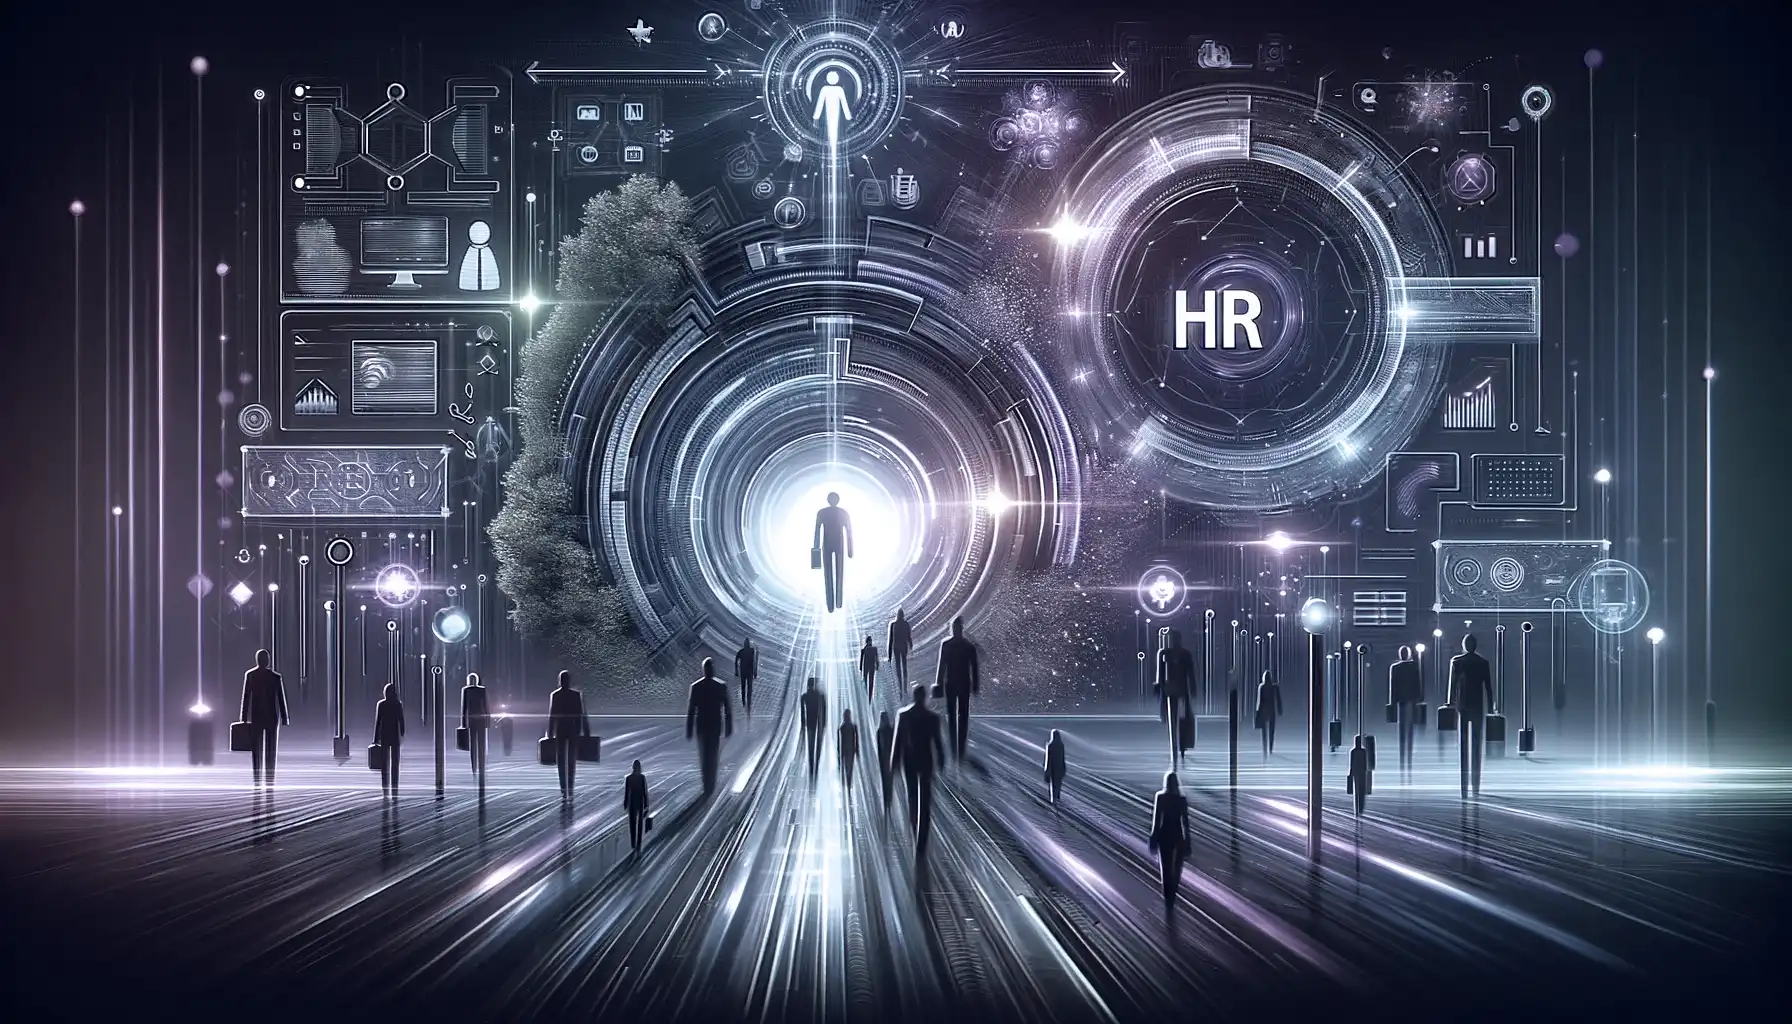 Featured image for “Business Process Automation to Modernize a Large Retailer’s HR Operations”